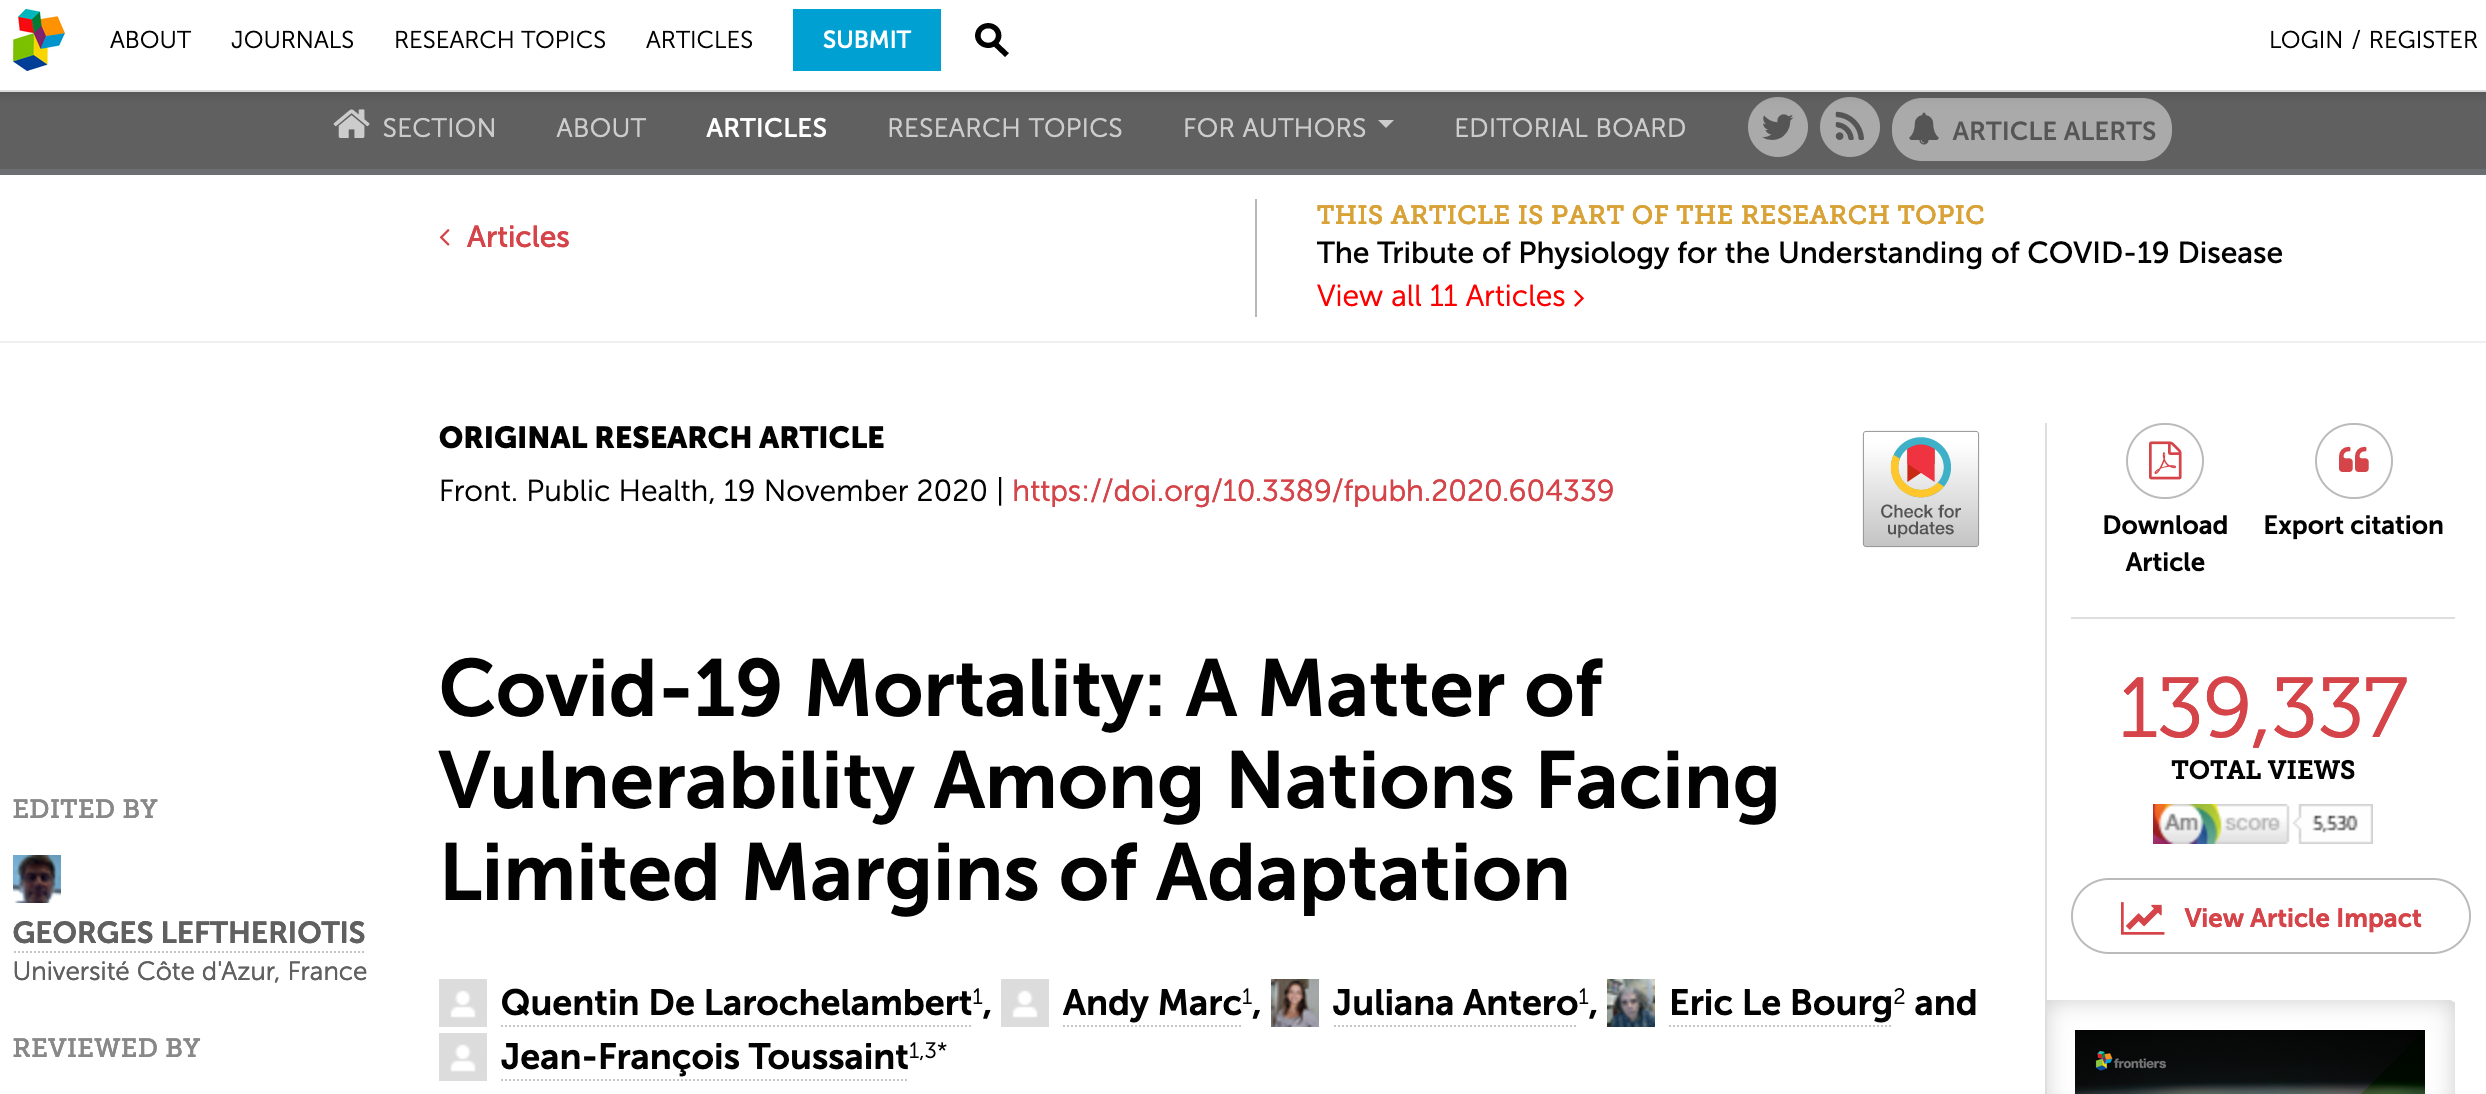 Covid-19 Mortality: A Matter of Vulnerability Among Nations Facing Limited Margins of Adaptation